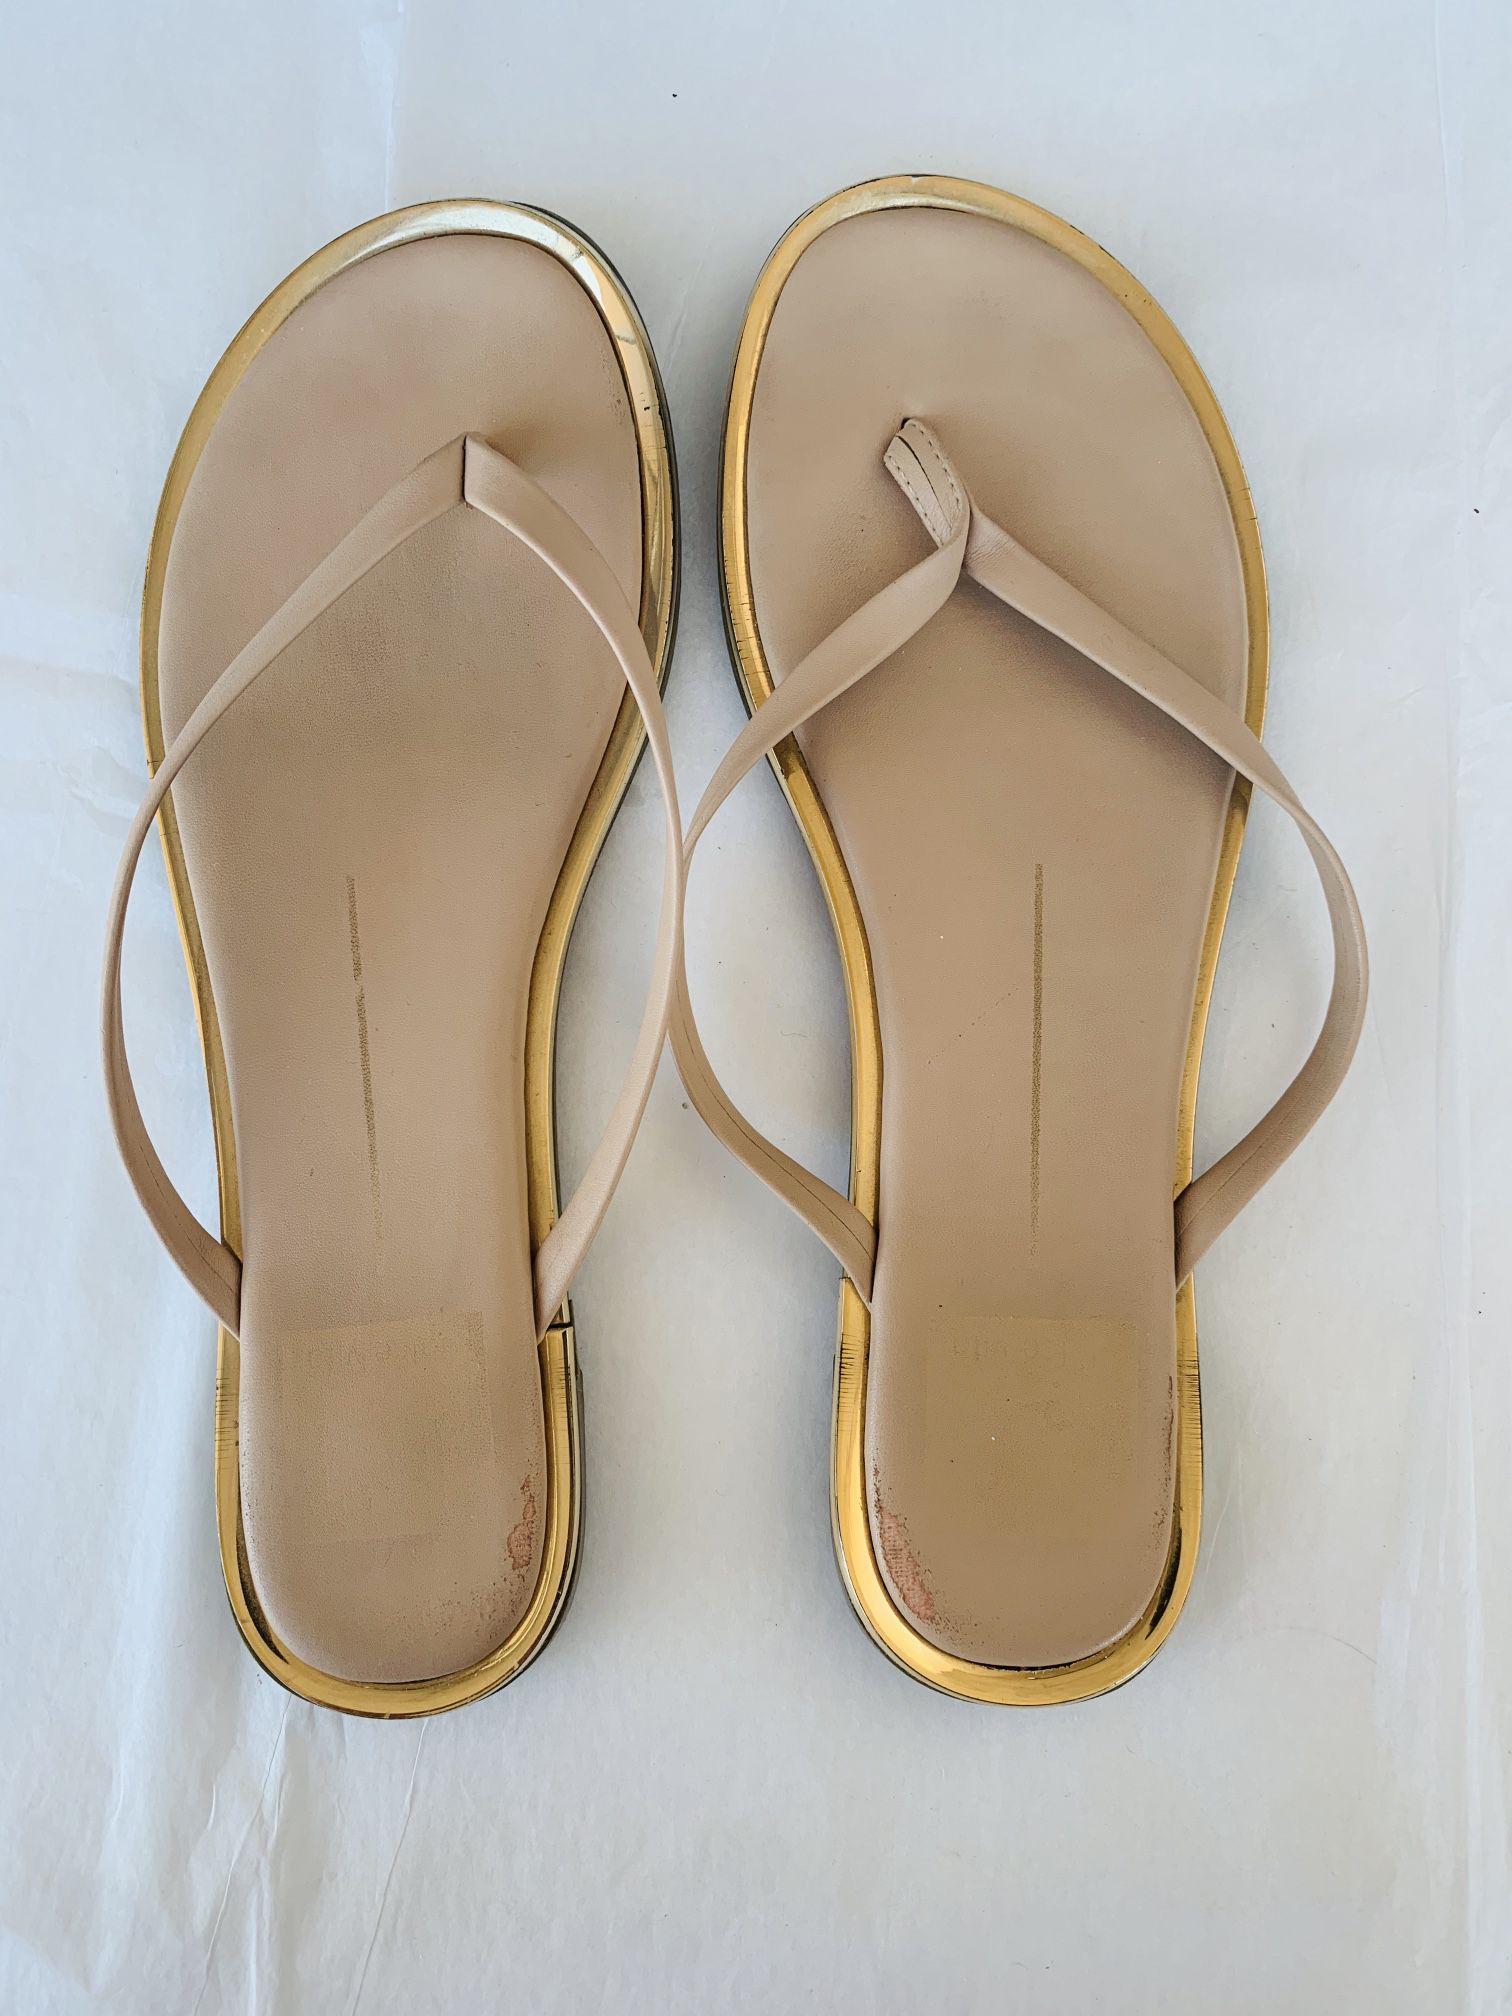 Dolce Vita Nude/Tan Thong Sandals with Gold Rim